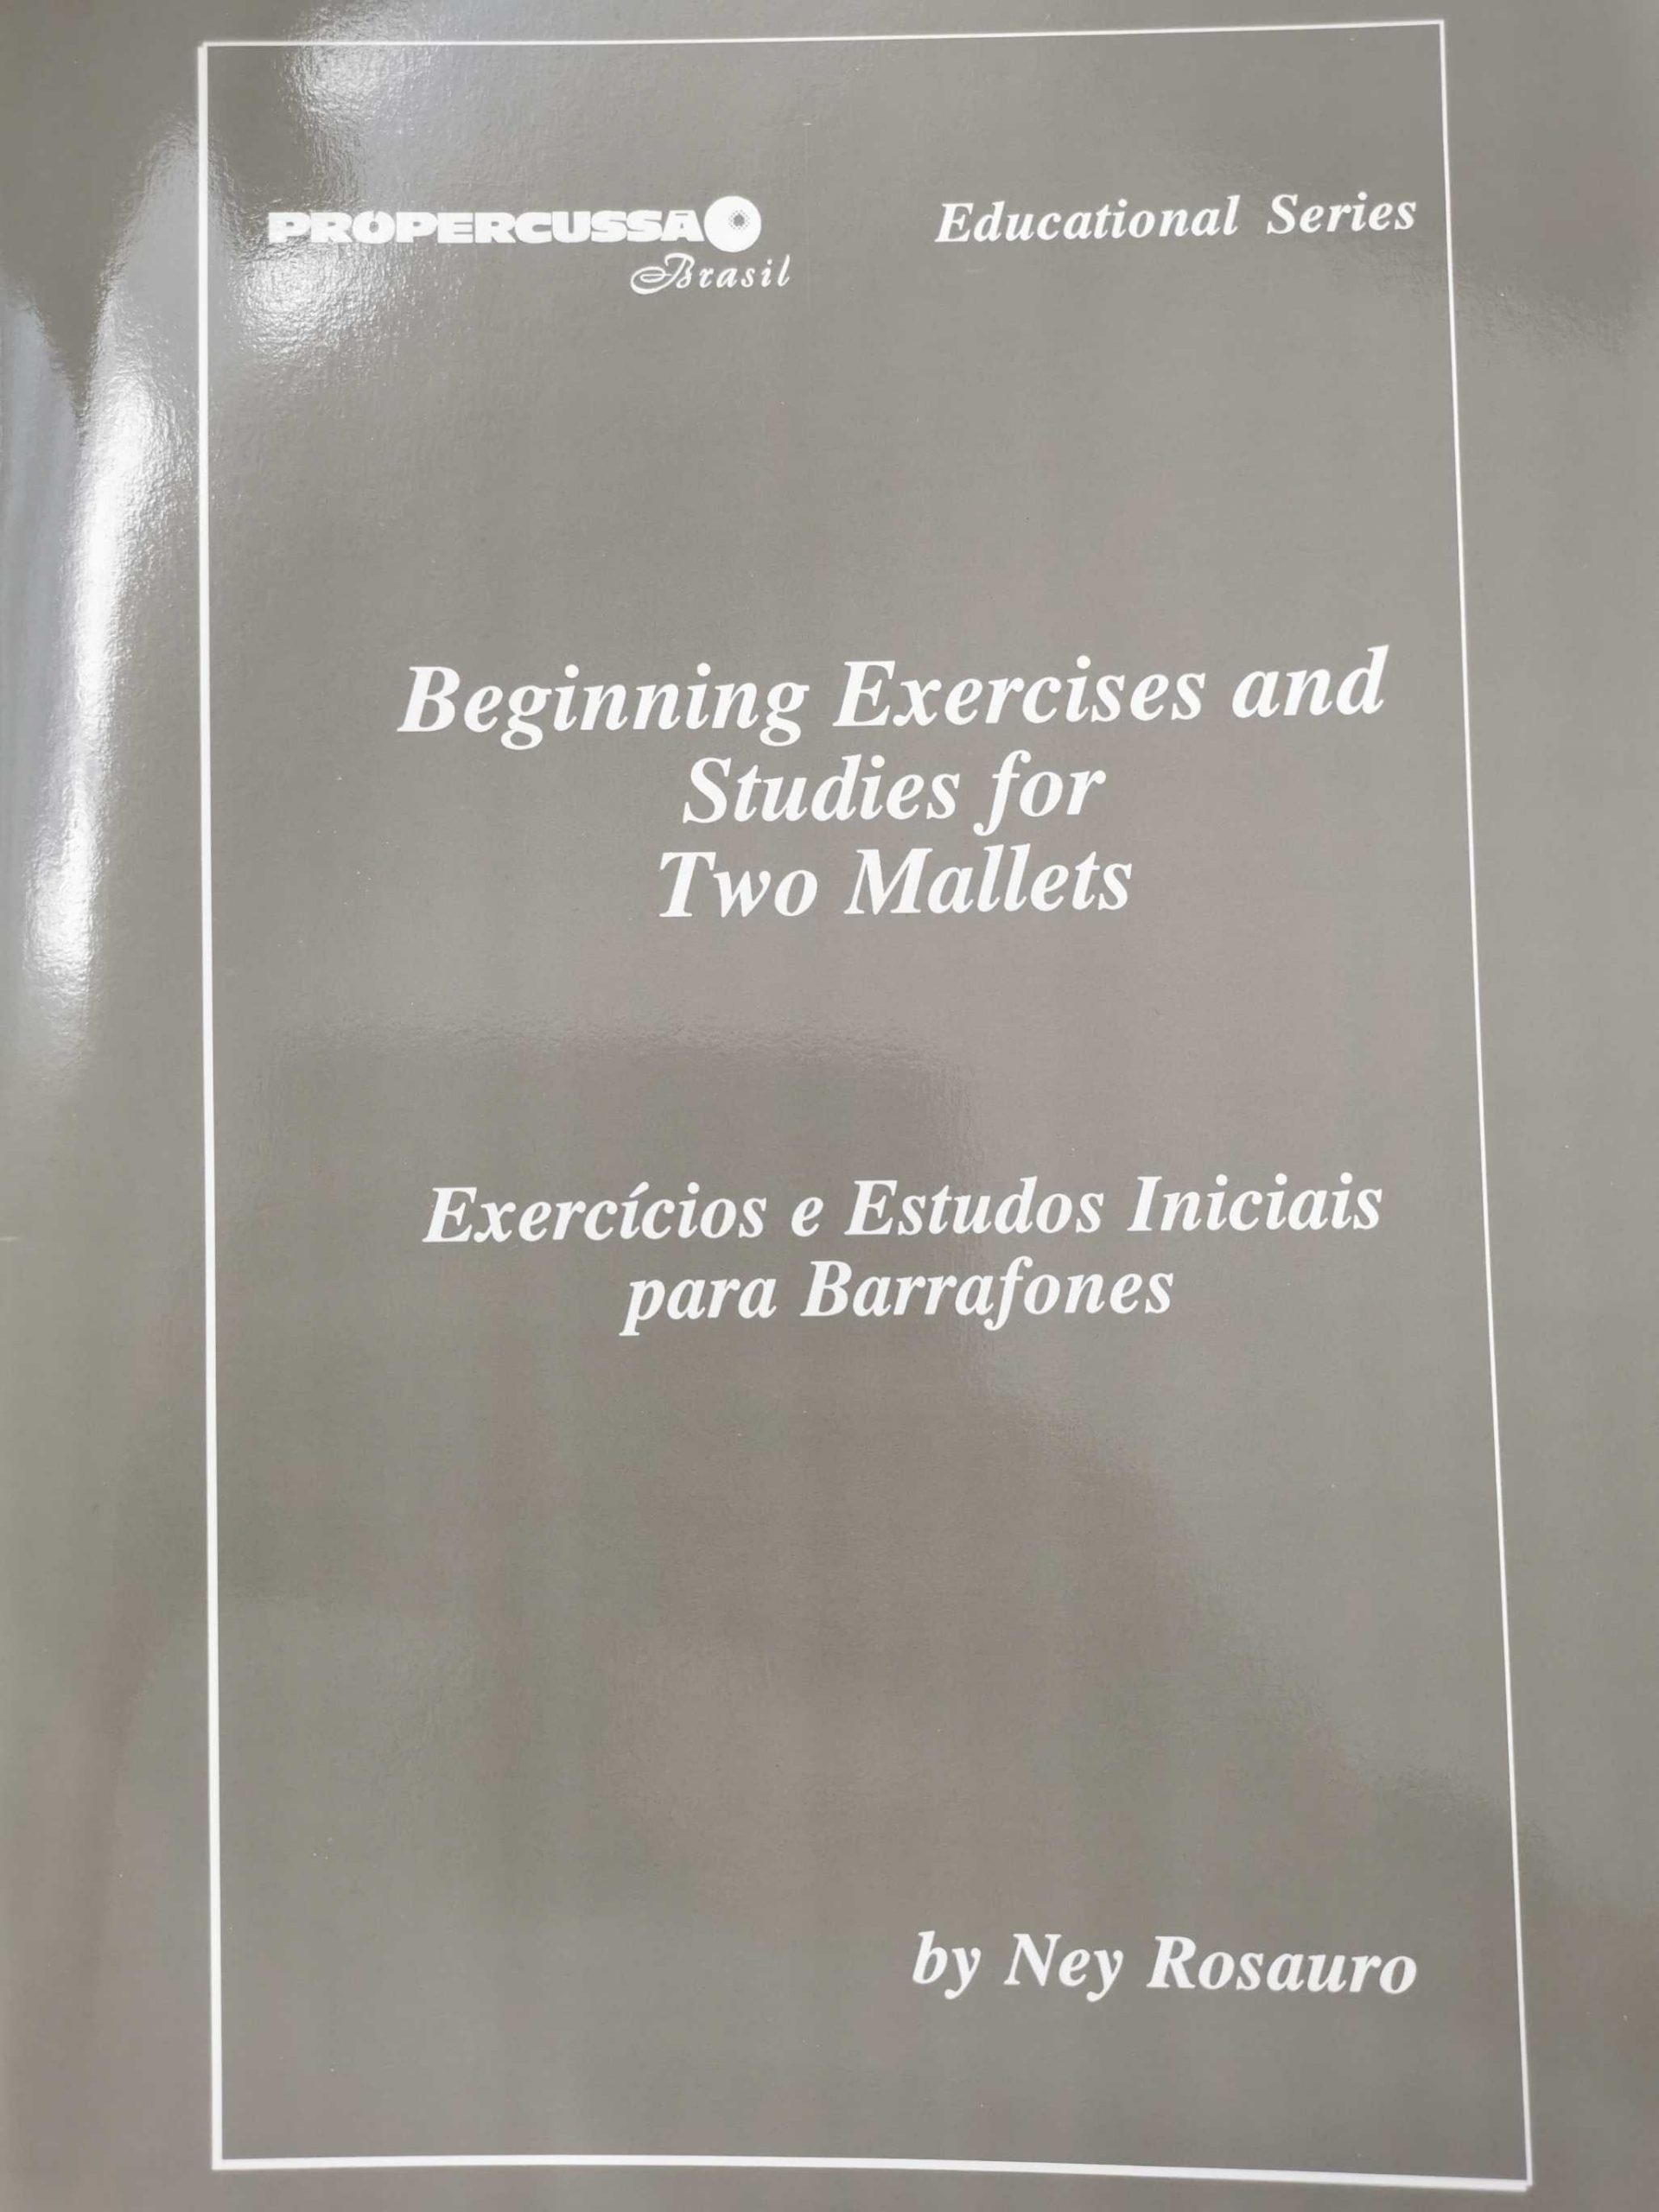 Beginning Exercises and Studies for Two Mallets by Ney Rosauro